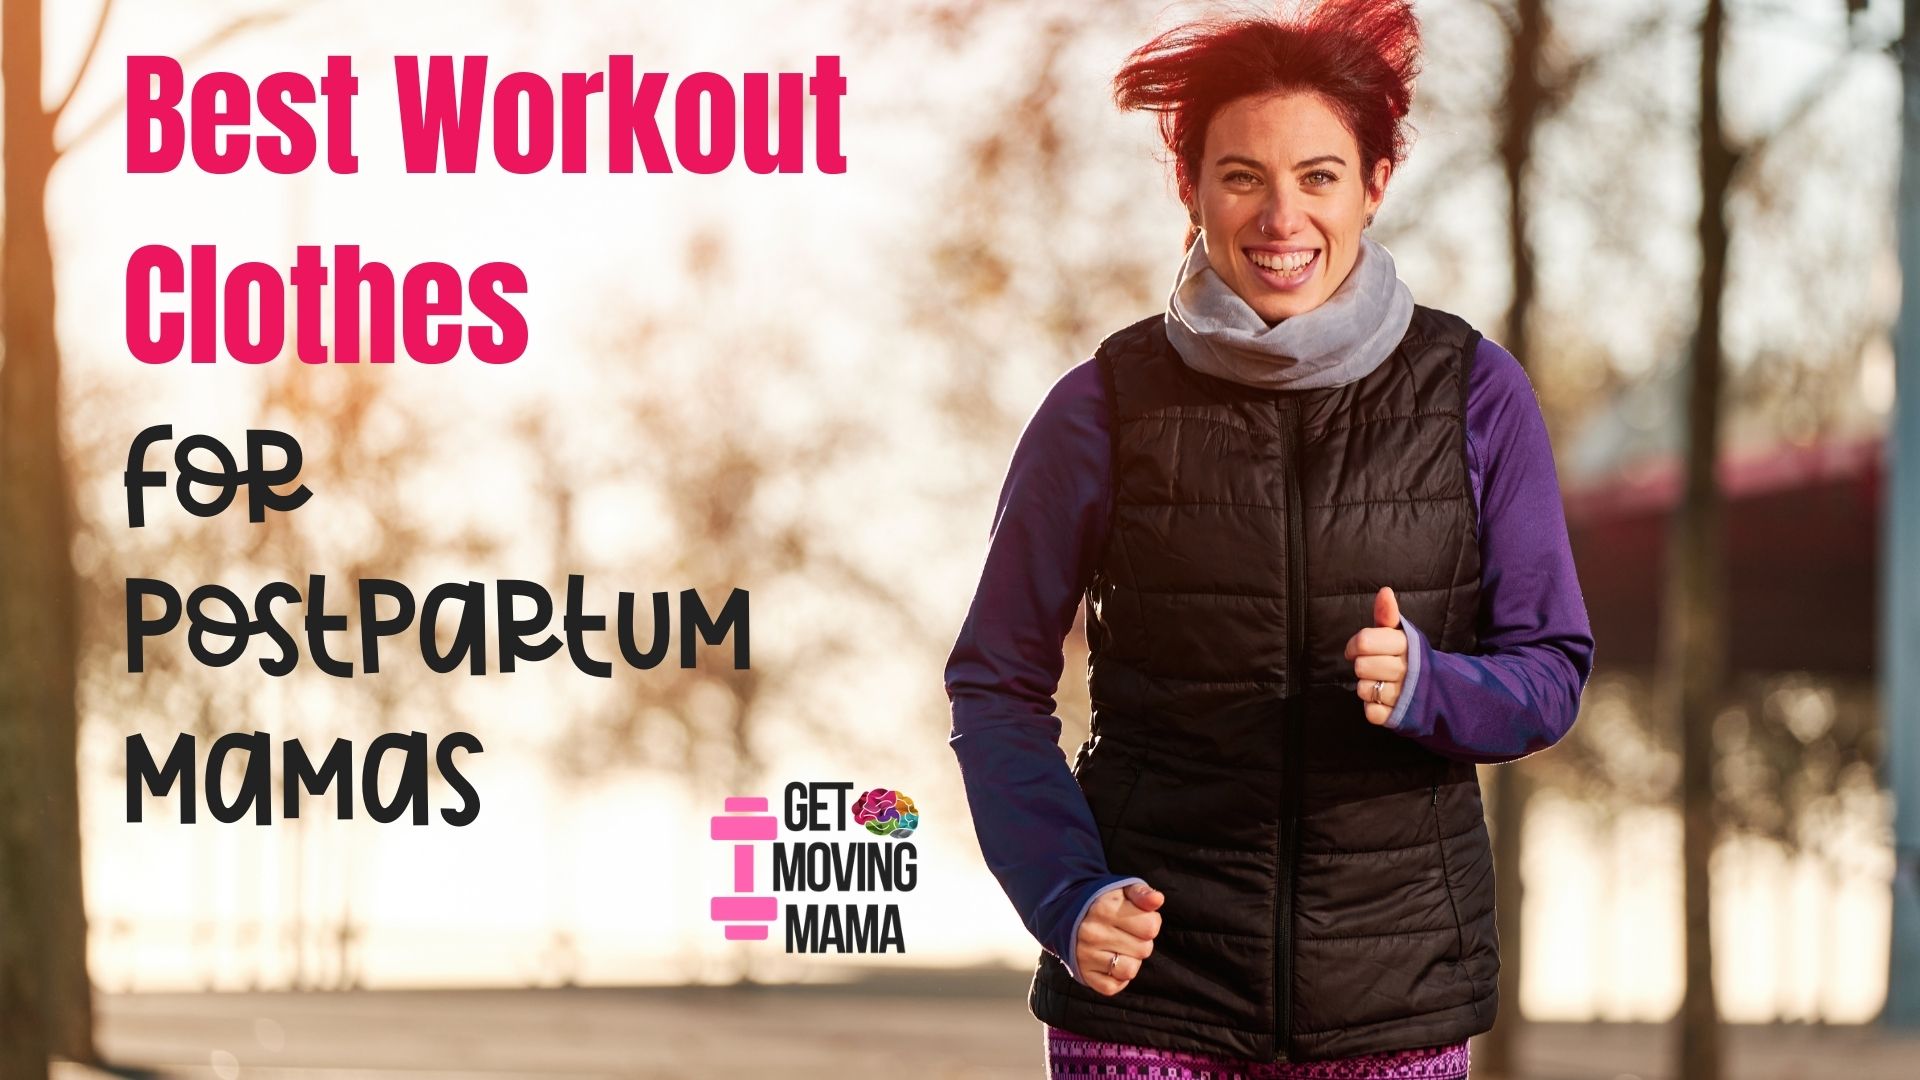 A picture of a woman running with best workout clothes for postpartum mamas written in pink and black text.